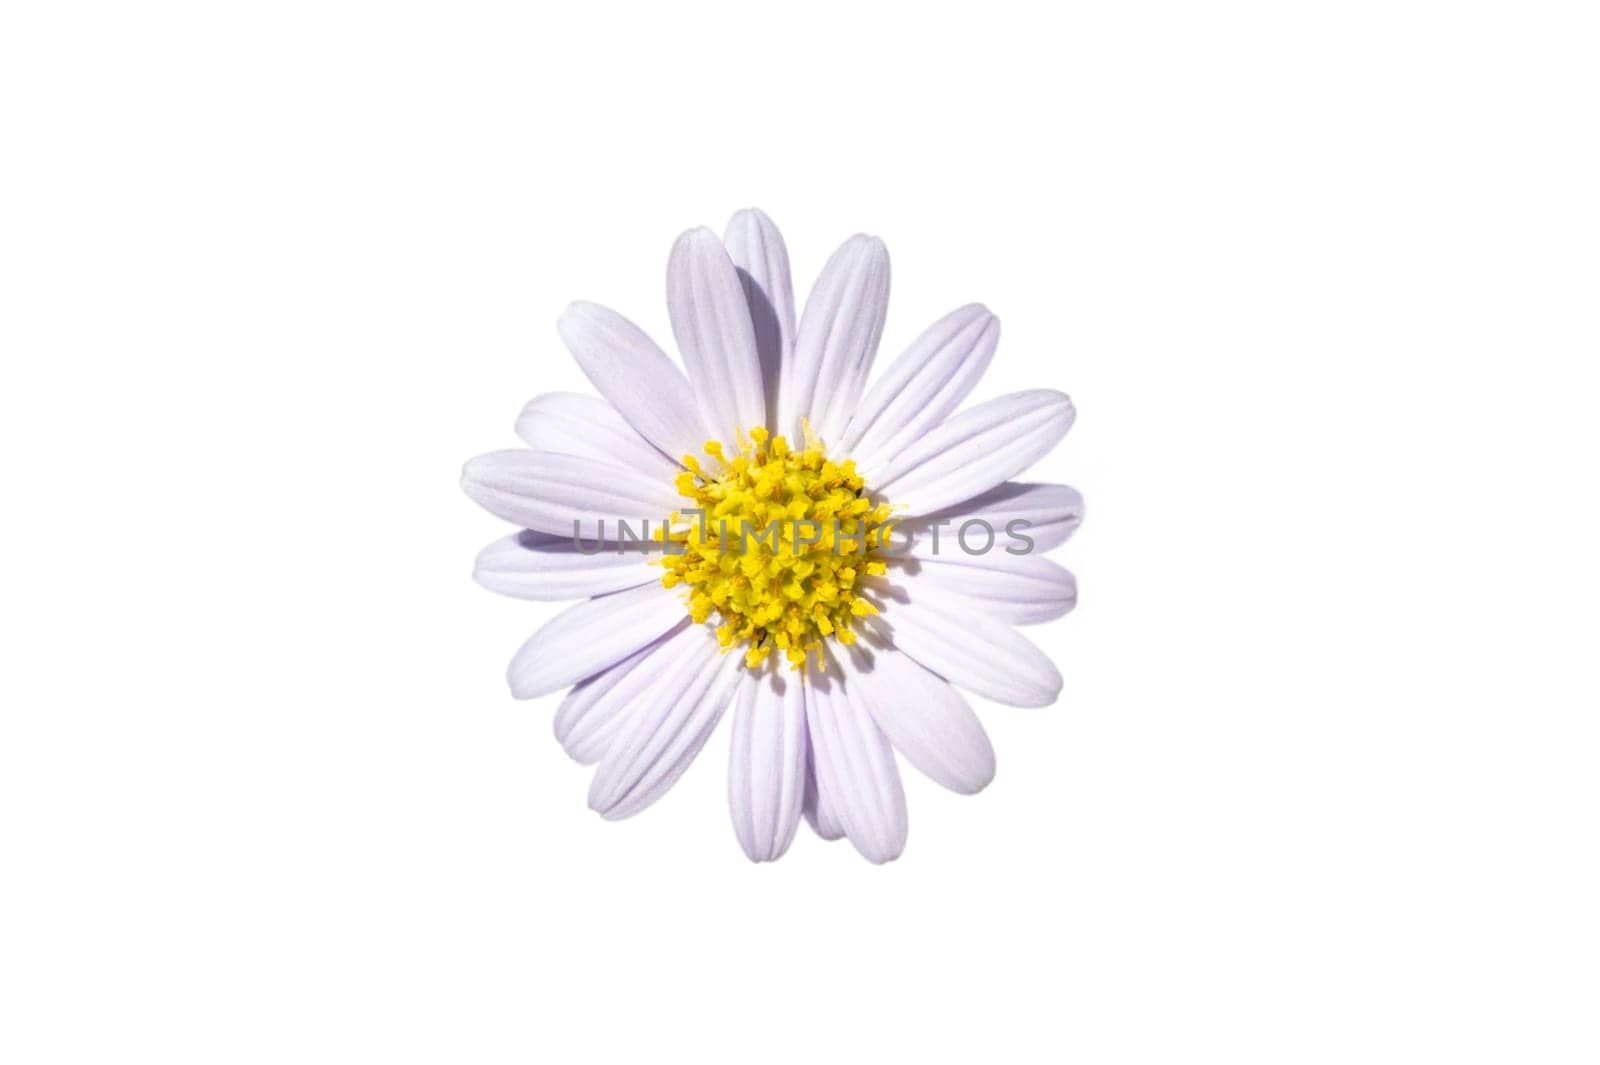 White daisy flower on a white background. Isolate by sarayut_thaneerat